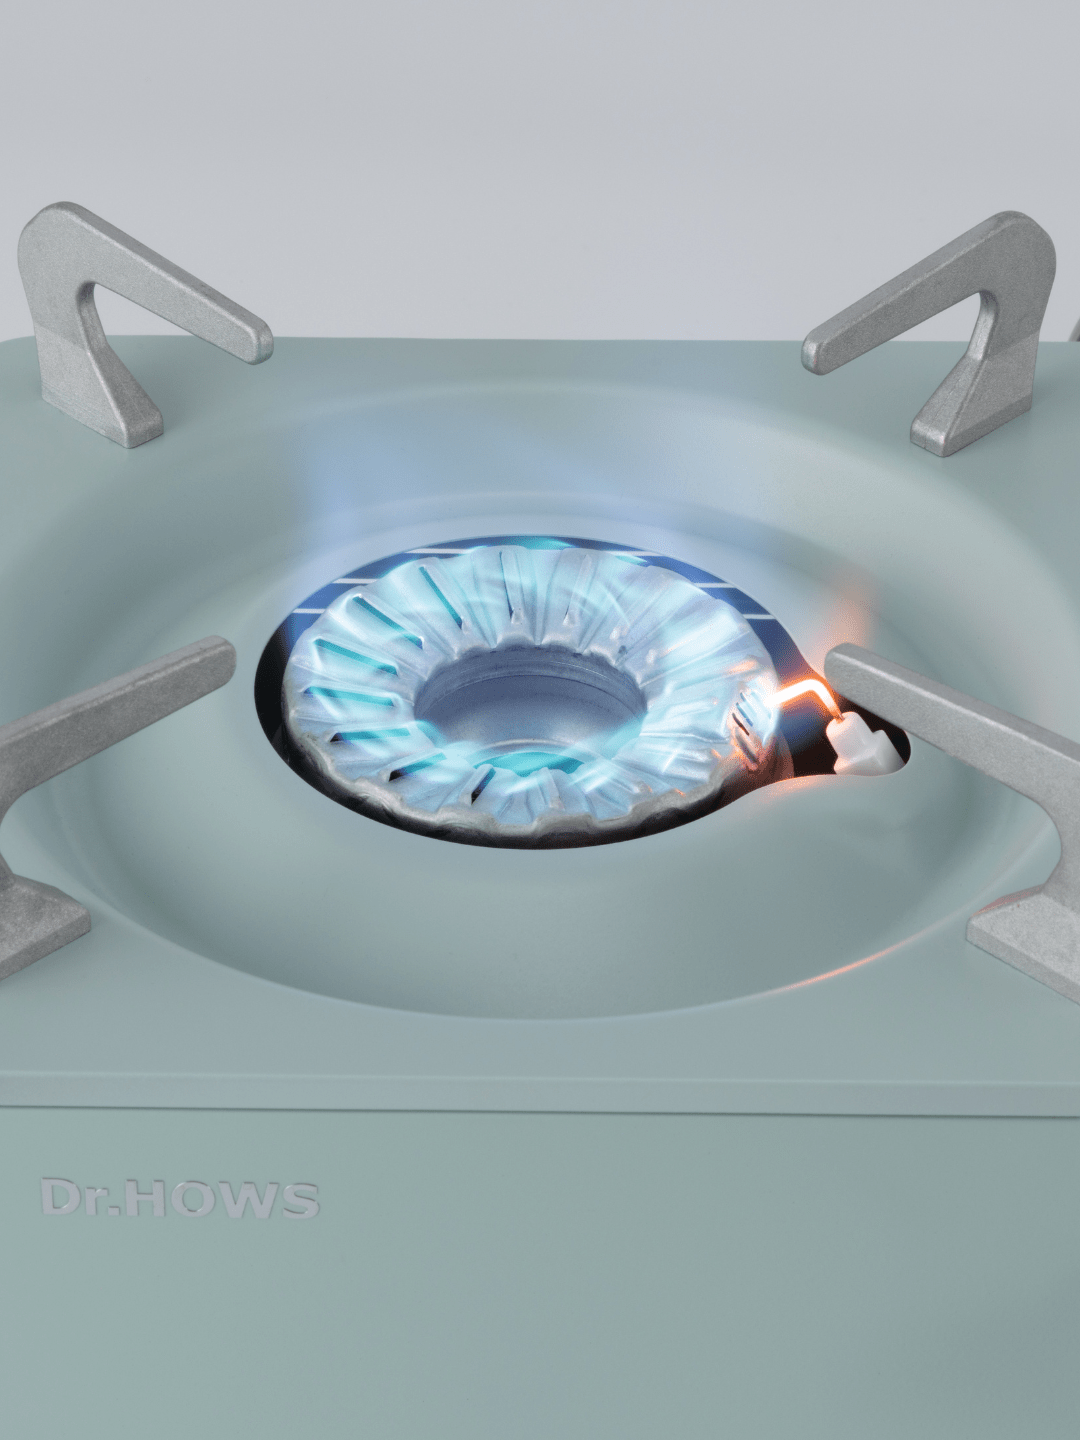 BR-4621-Dr.HOWS-Dr.HOWS カセットコンロ｜Twinkle Mini Stove